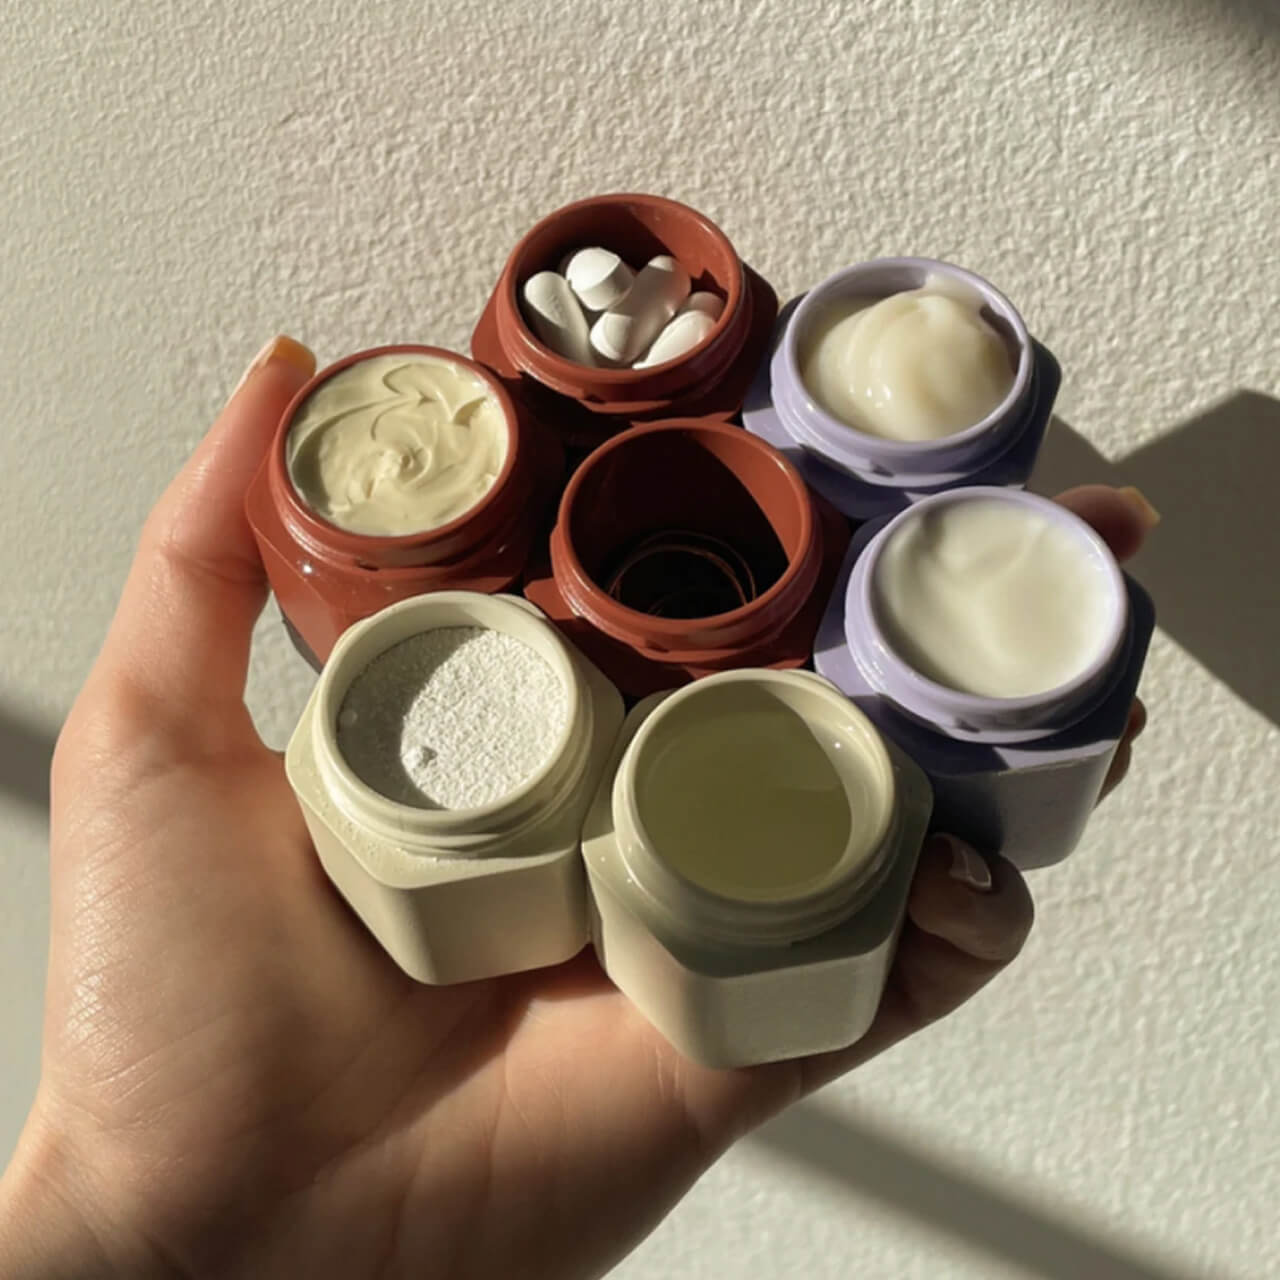 Toiletry organization made with recycled plastic